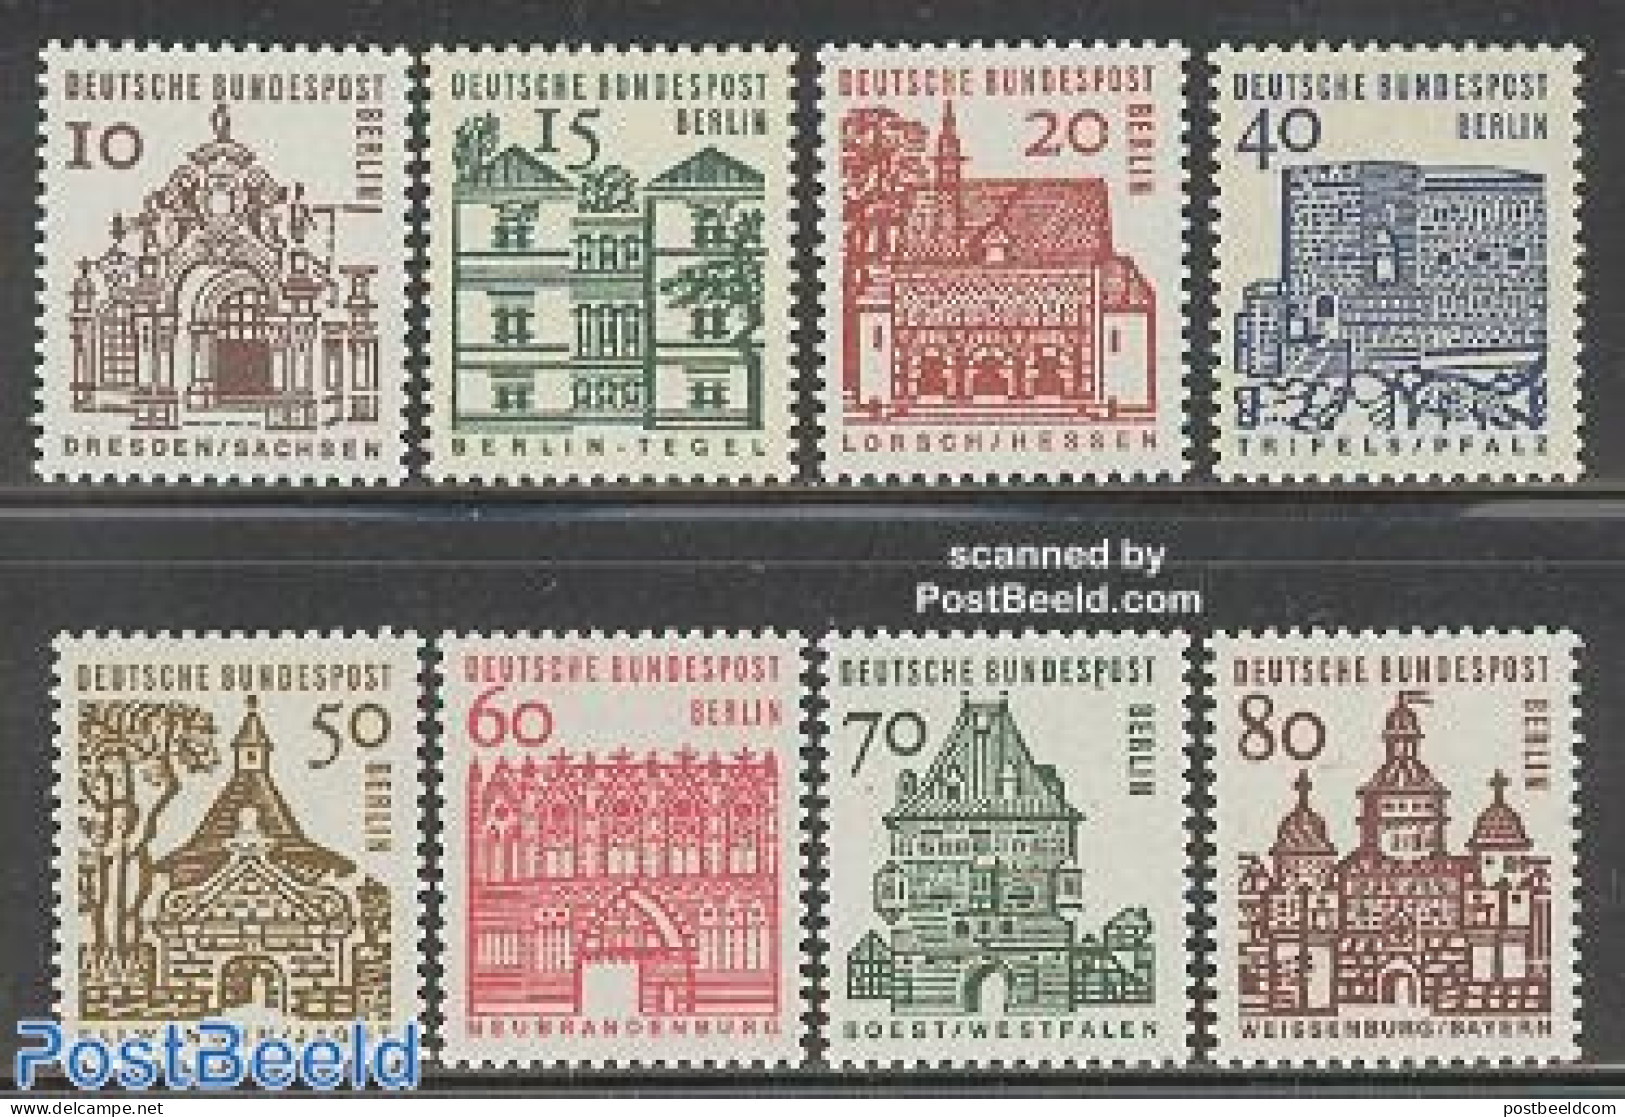 Germany, Berlin 1964 Definitives 8v, Mint NH, Art - Architecture - Castles & Fortifications - Ungebraucht